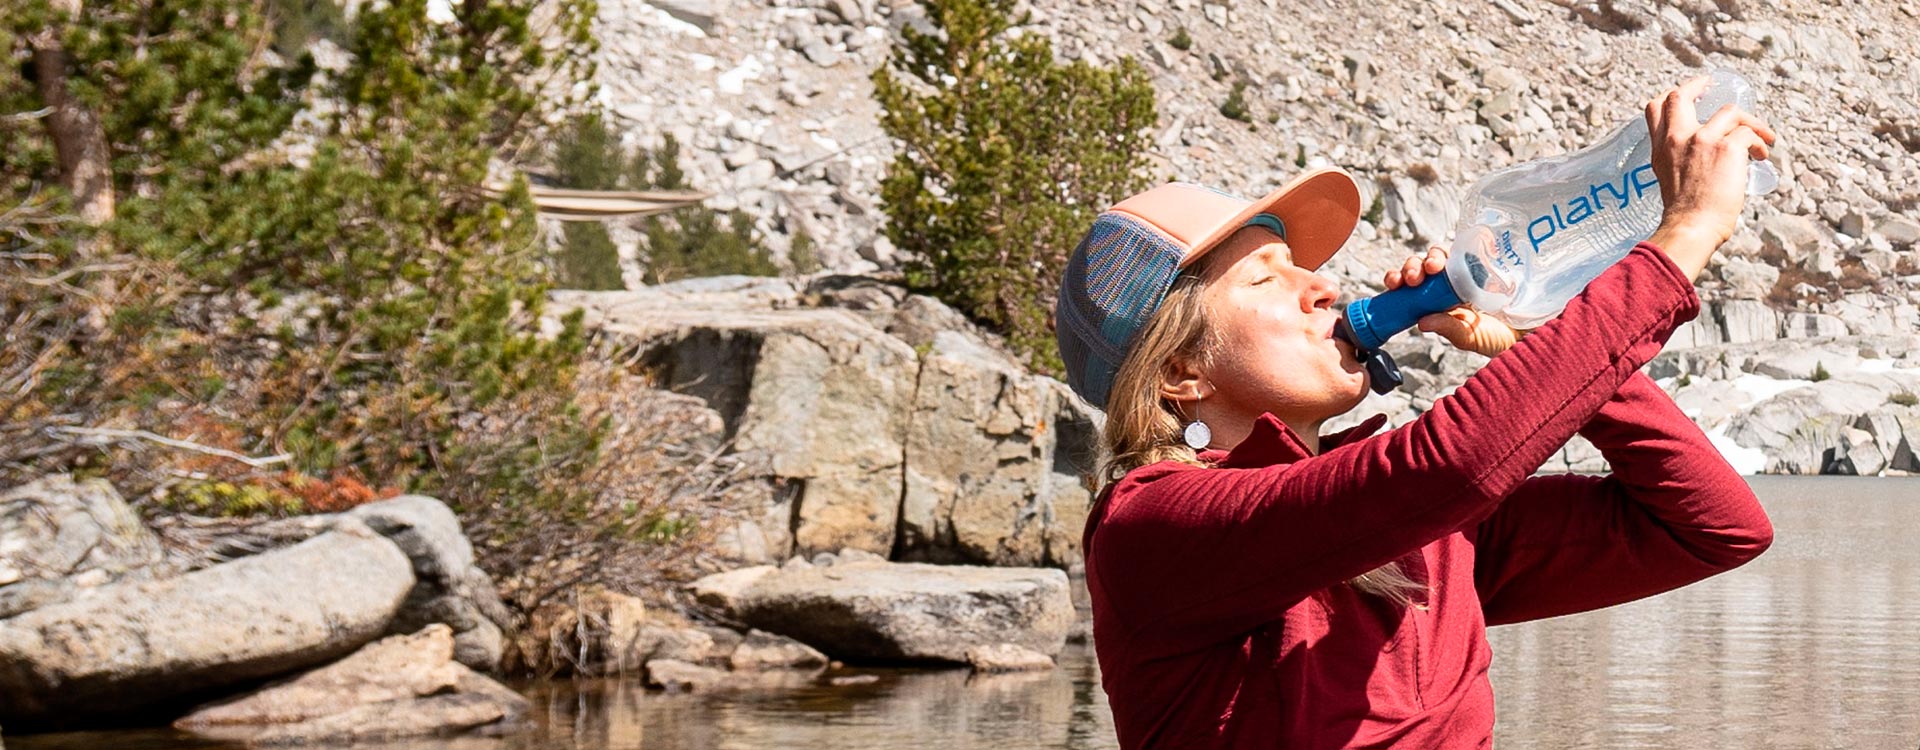 Treat Your Water Right - Find the perfect filter for your summer adventures.